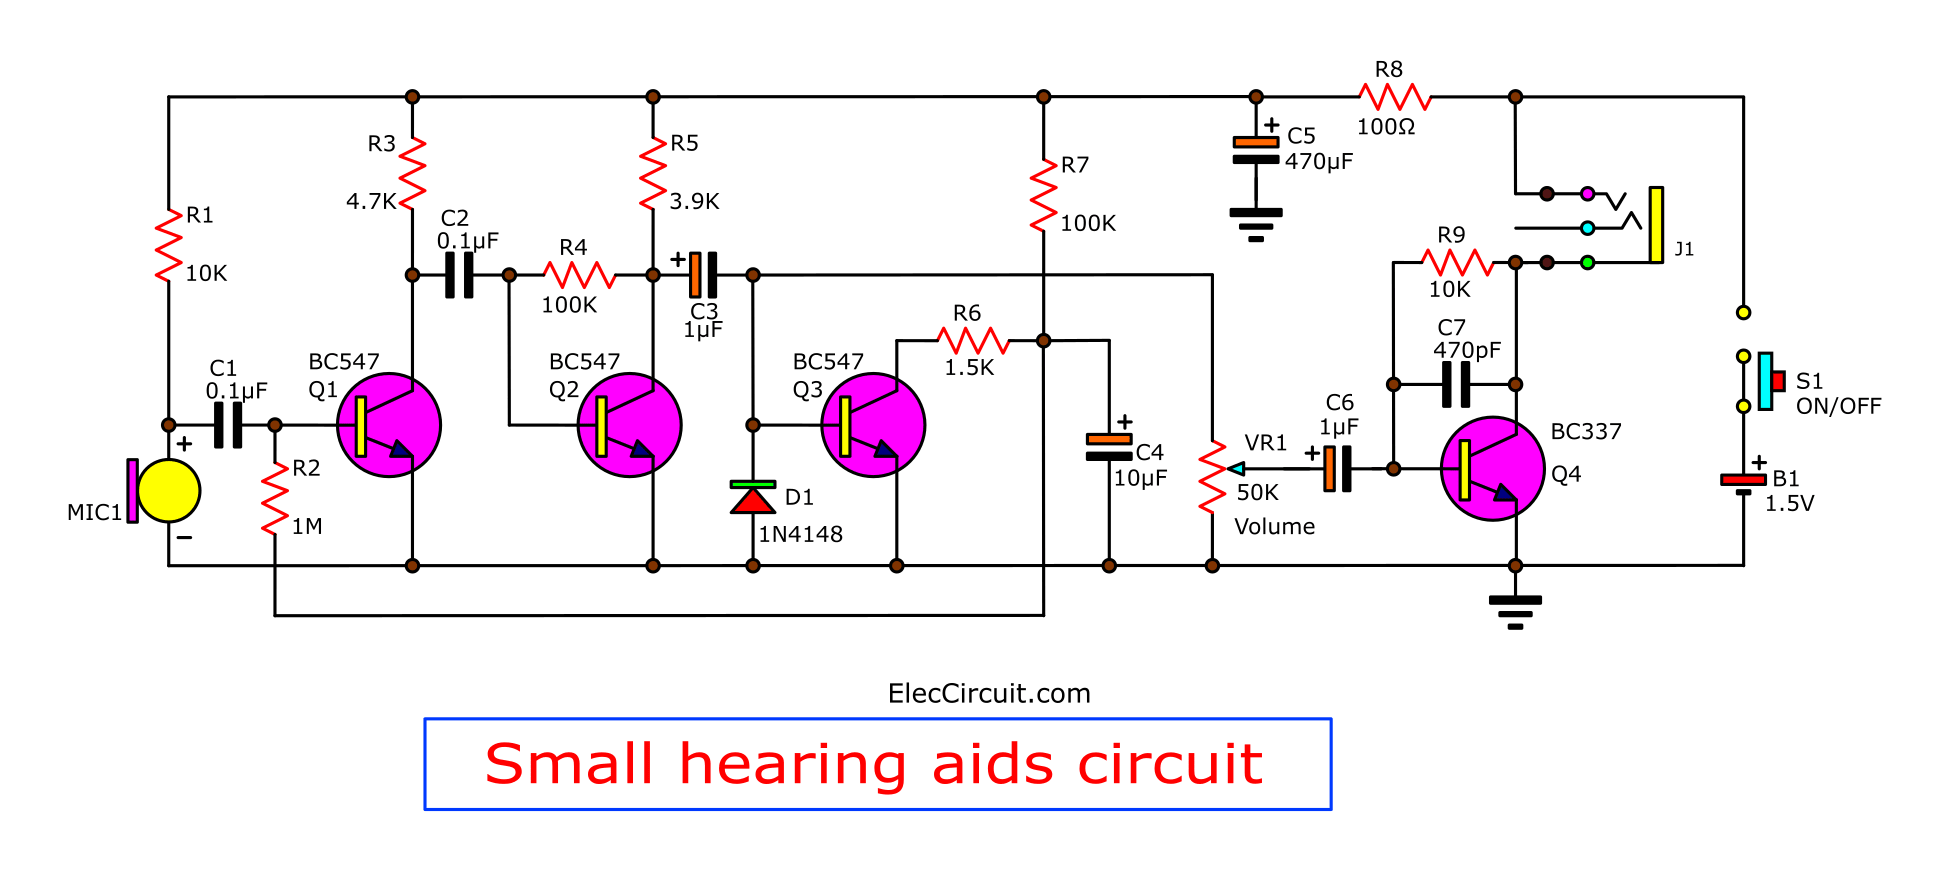 Hearing Aid Schematic Diagram - The Cheap Small Hearing Aids Project - Hearing Aid Schematic    Diagram